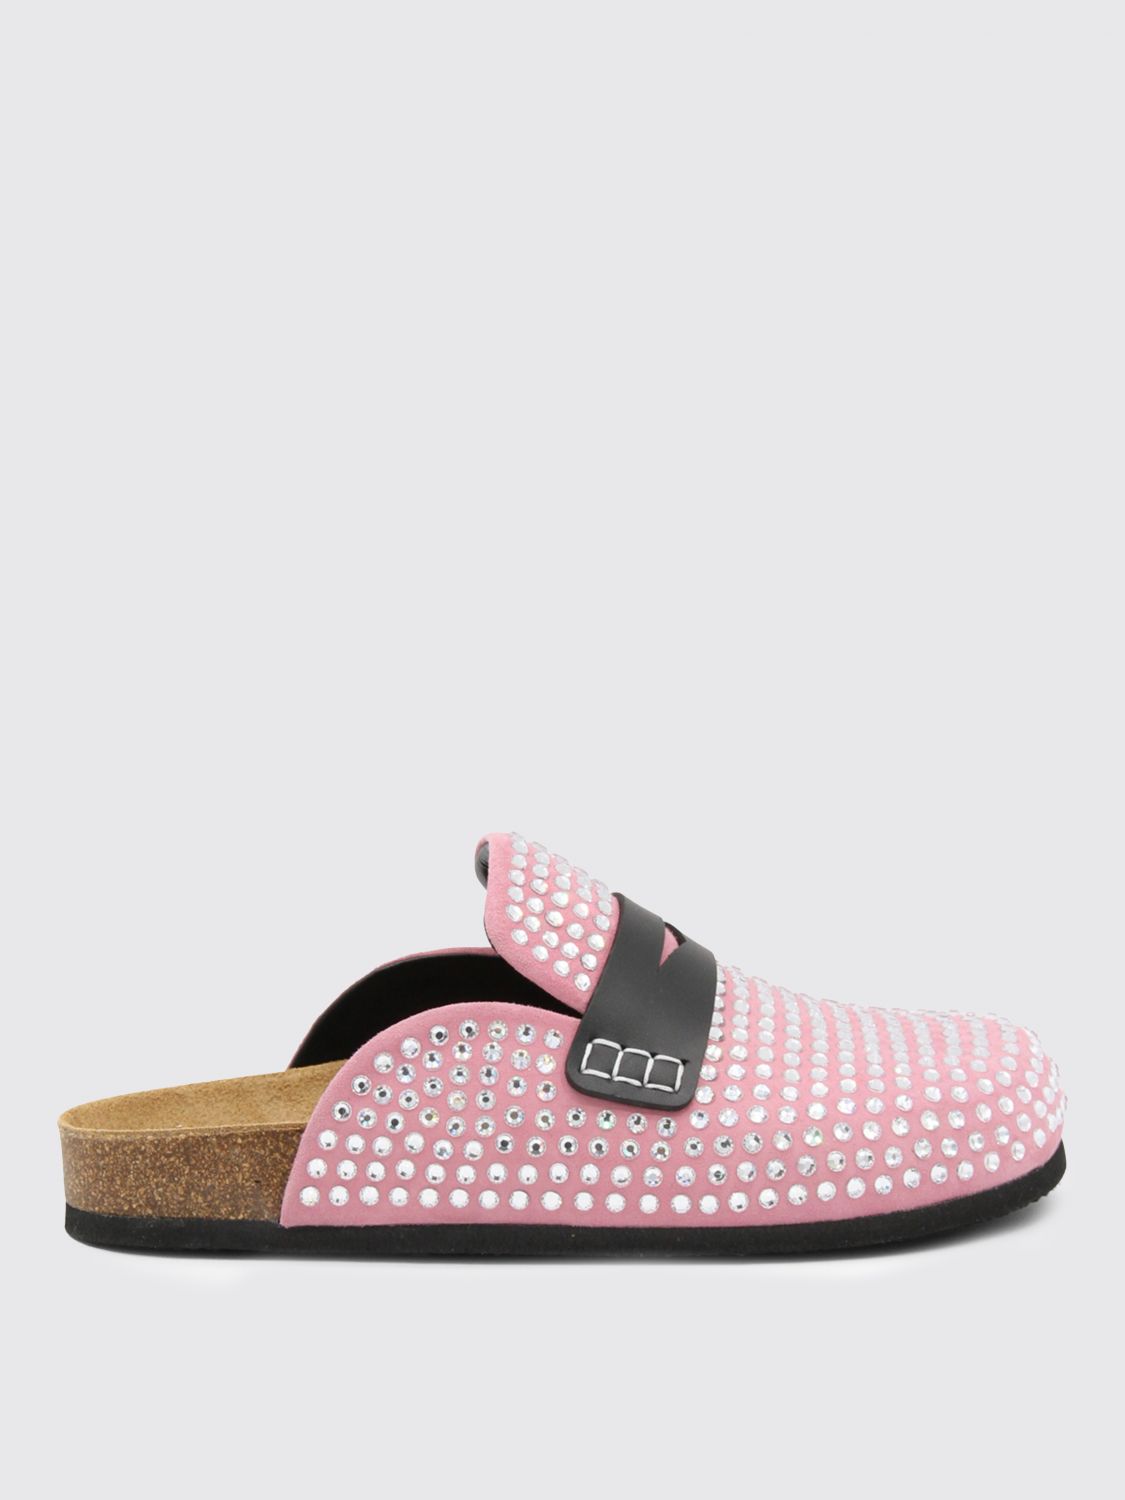 JW ANDERSON FLAT SHOES JW ANDERSON WOMAN COLOR PINK,E14864010